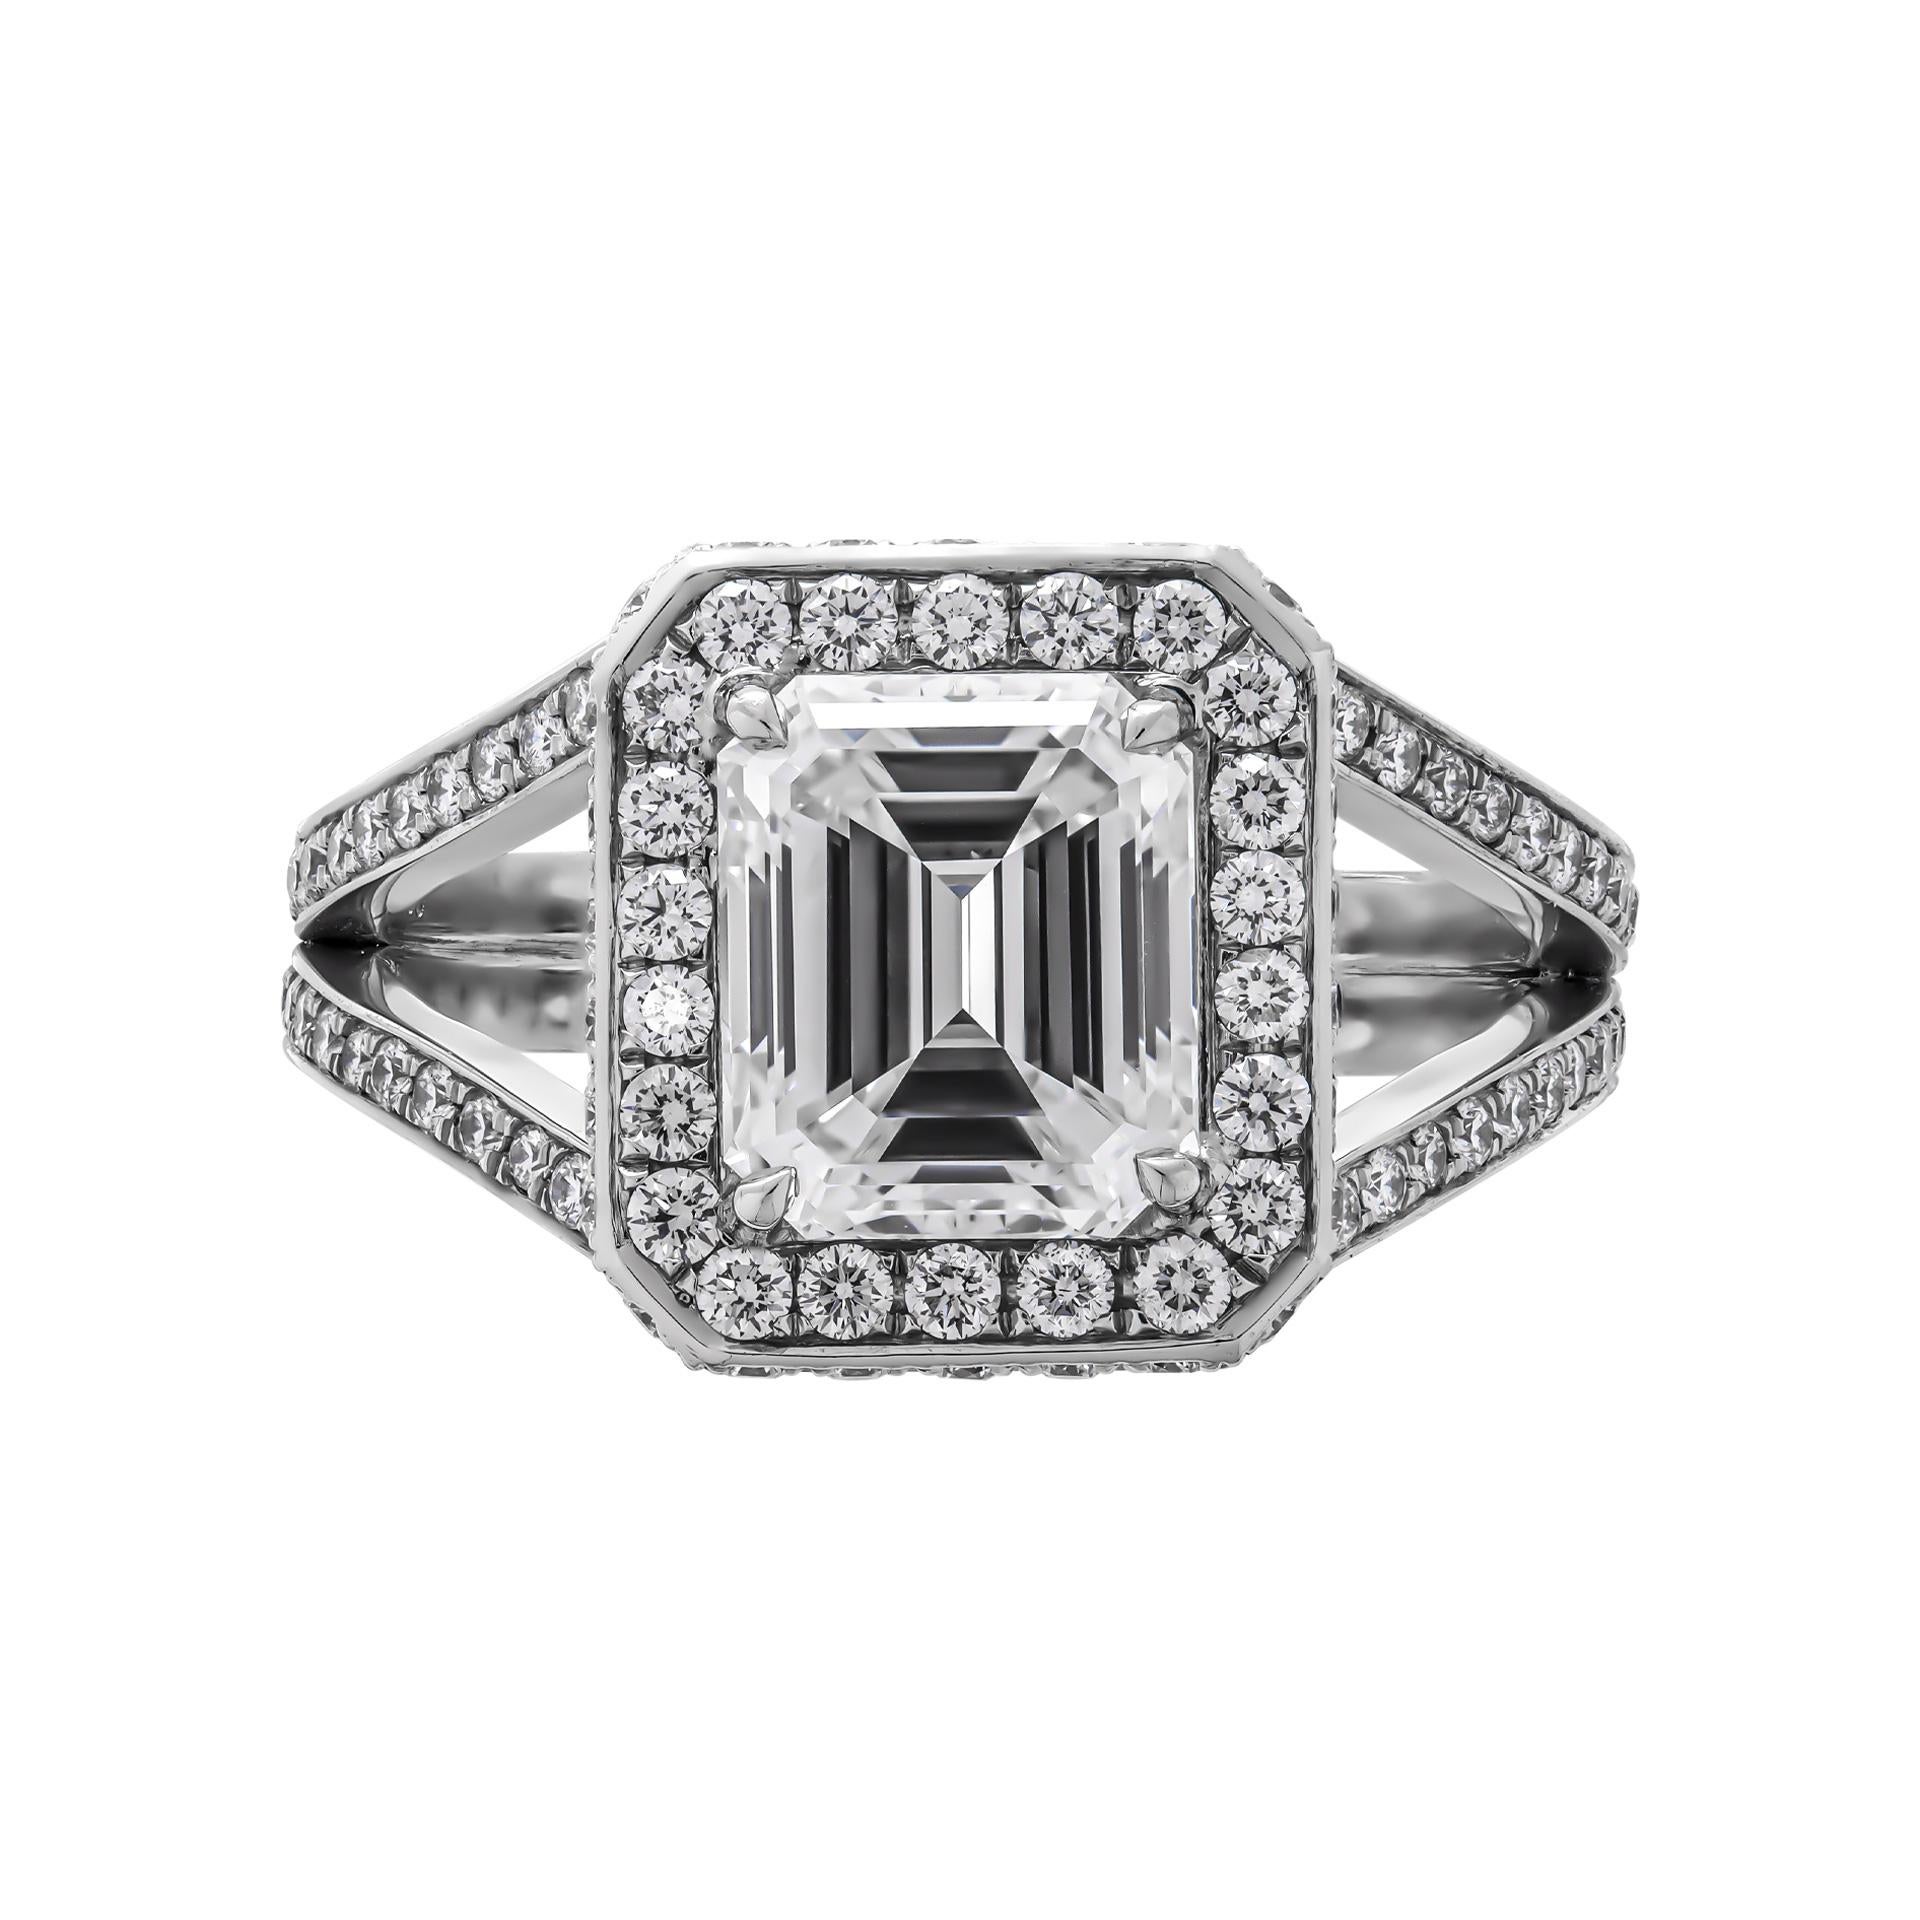 GIA Certified 2.01 Carat Emerald Cut Diamond Engagement Ring
Timeless Classic Emerald Cut Diamond Engagement Ring- Timeless classis with a modern spin
Mounted in Platinum, featuring exceptional pave work that compliments the center stone,
Mounting